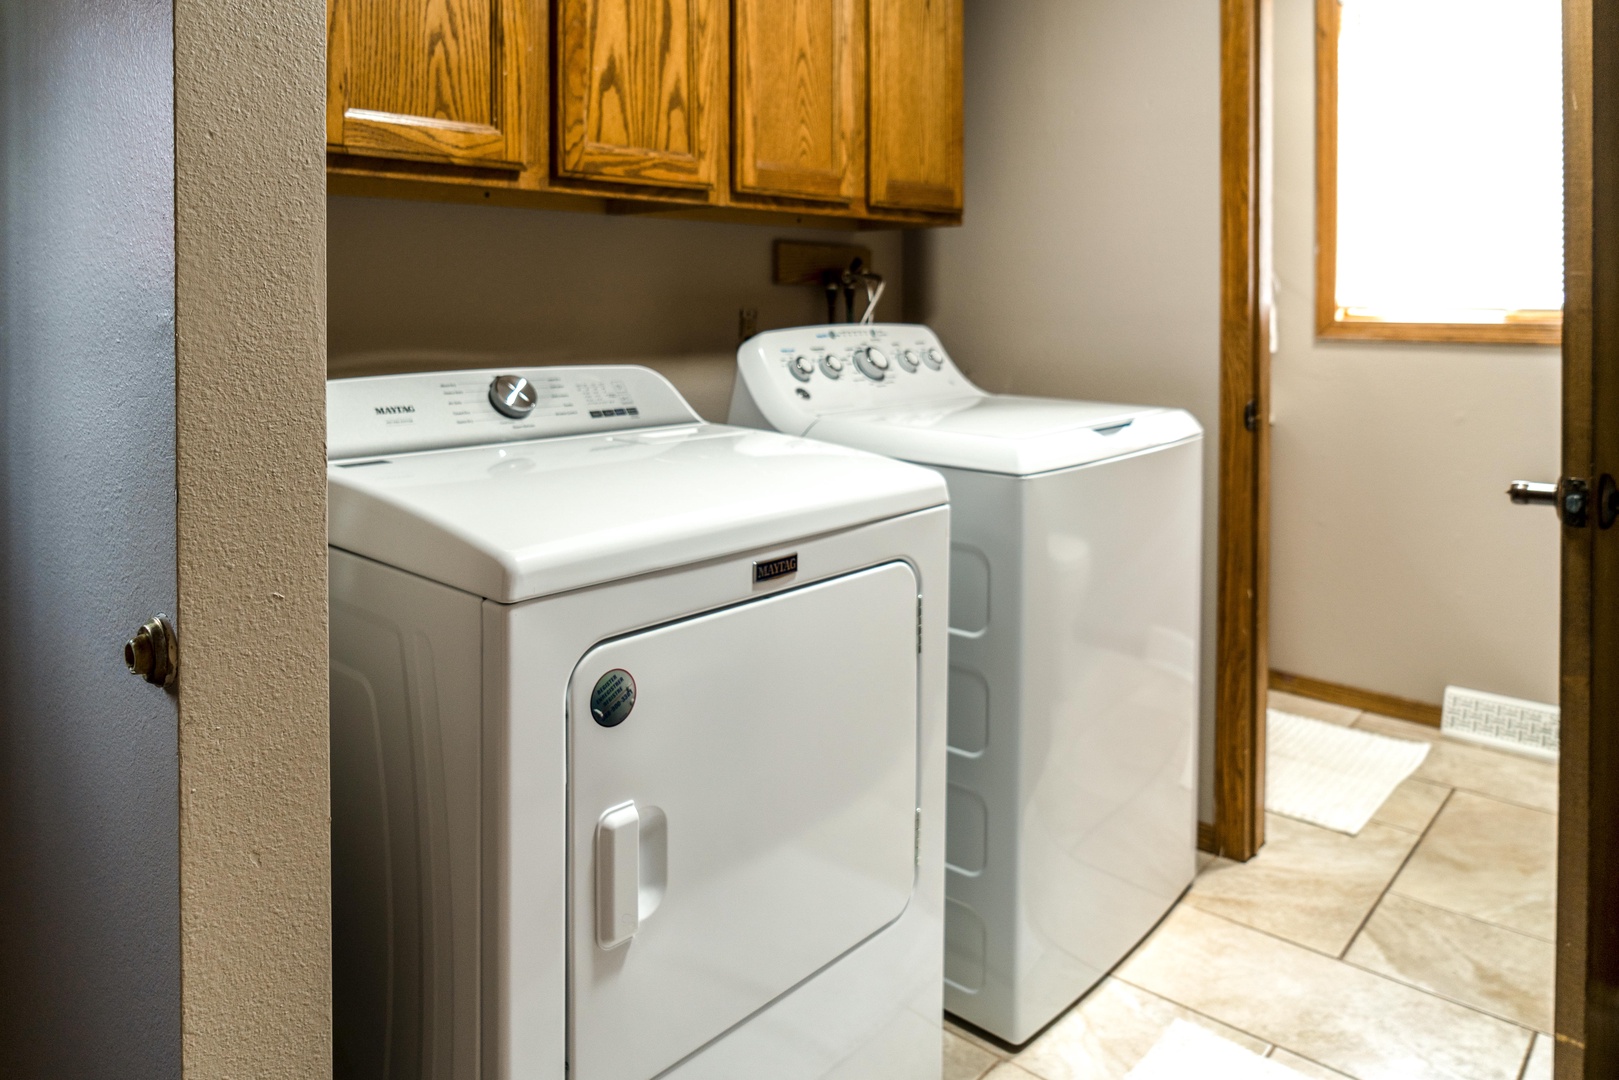 Private laundry is available for your stay located in the laundry room